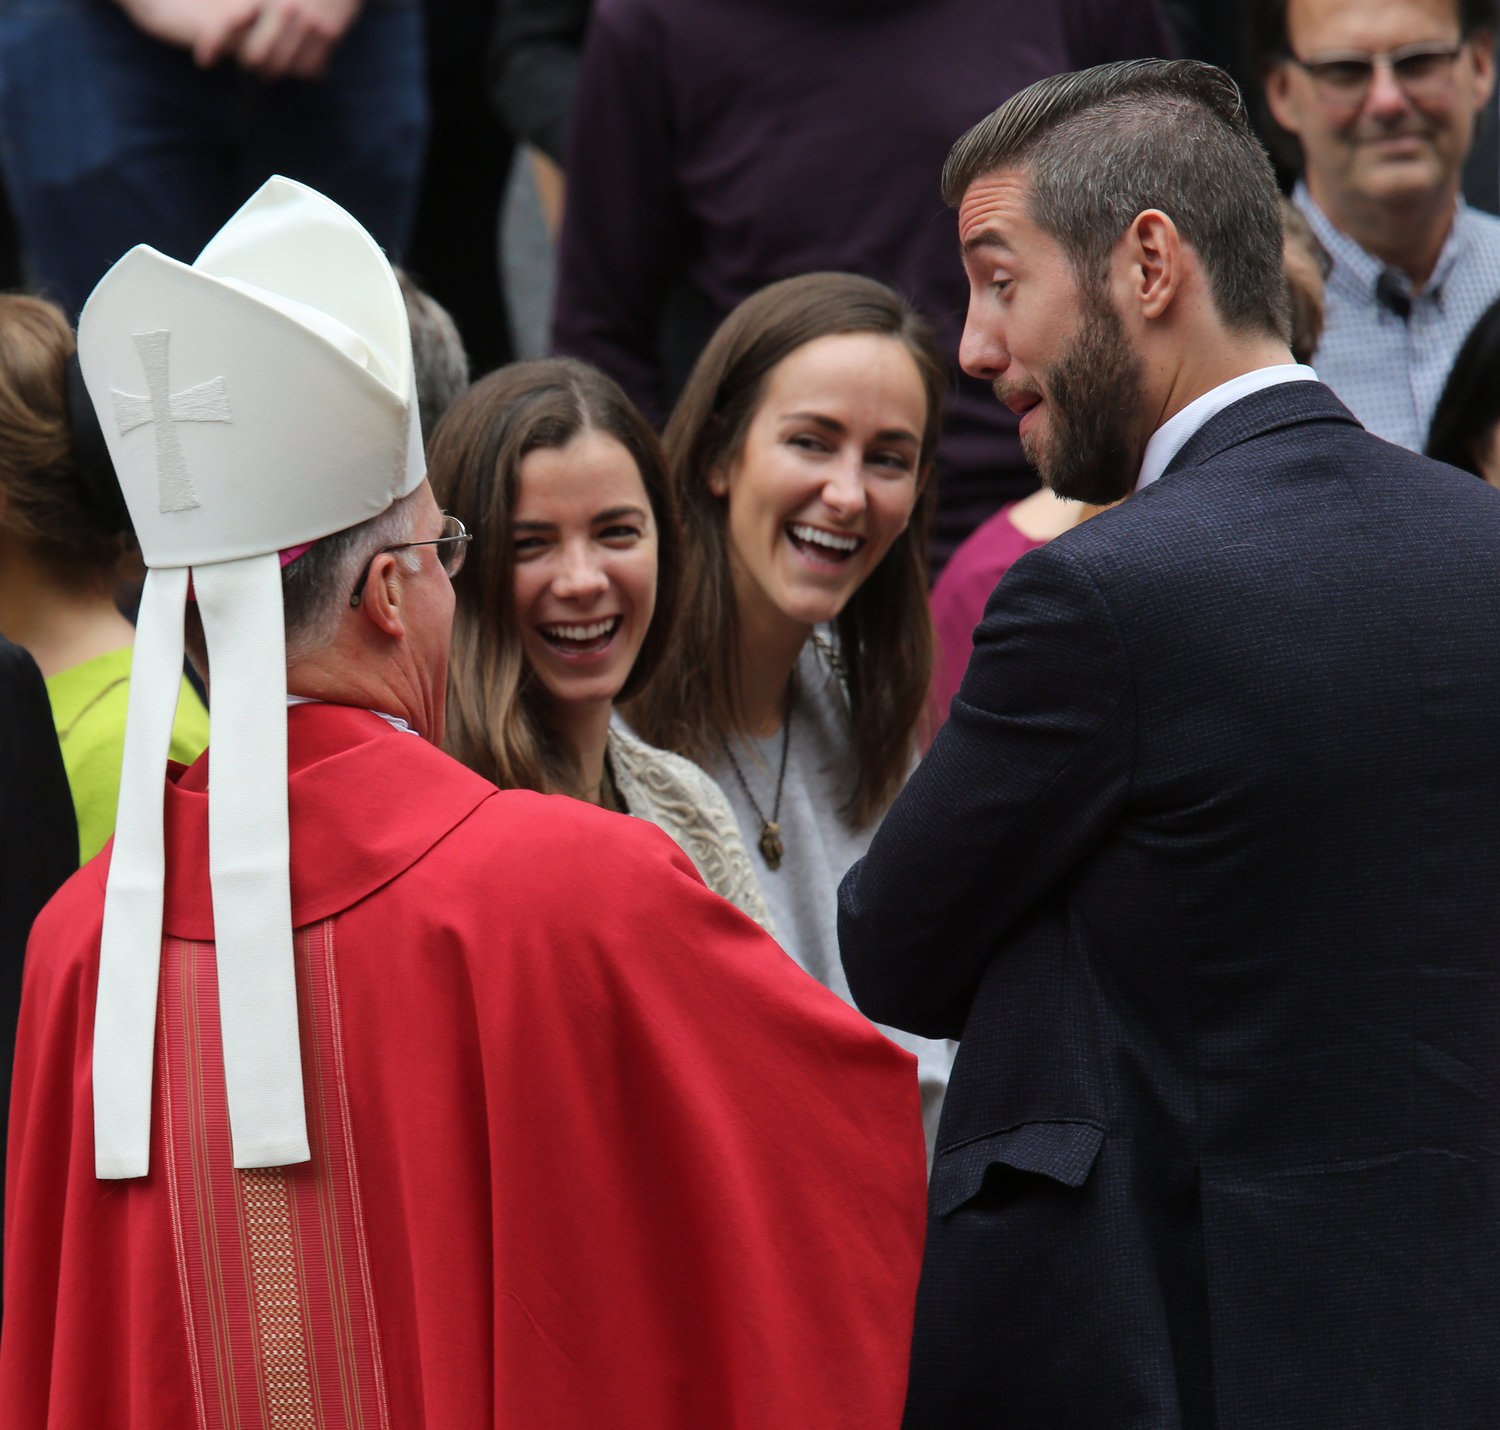 Archbishop Timothy P. Broglio of the U.S. Archdiocese for the Military Services shares a light moment with guests outside the Cathedral of St. Matthew the Apostle following the annual Red Mass in Washington Oct. 6, 2019. The Mass traditionally marks the start of the court year, including the opening of the Supreme Court term.